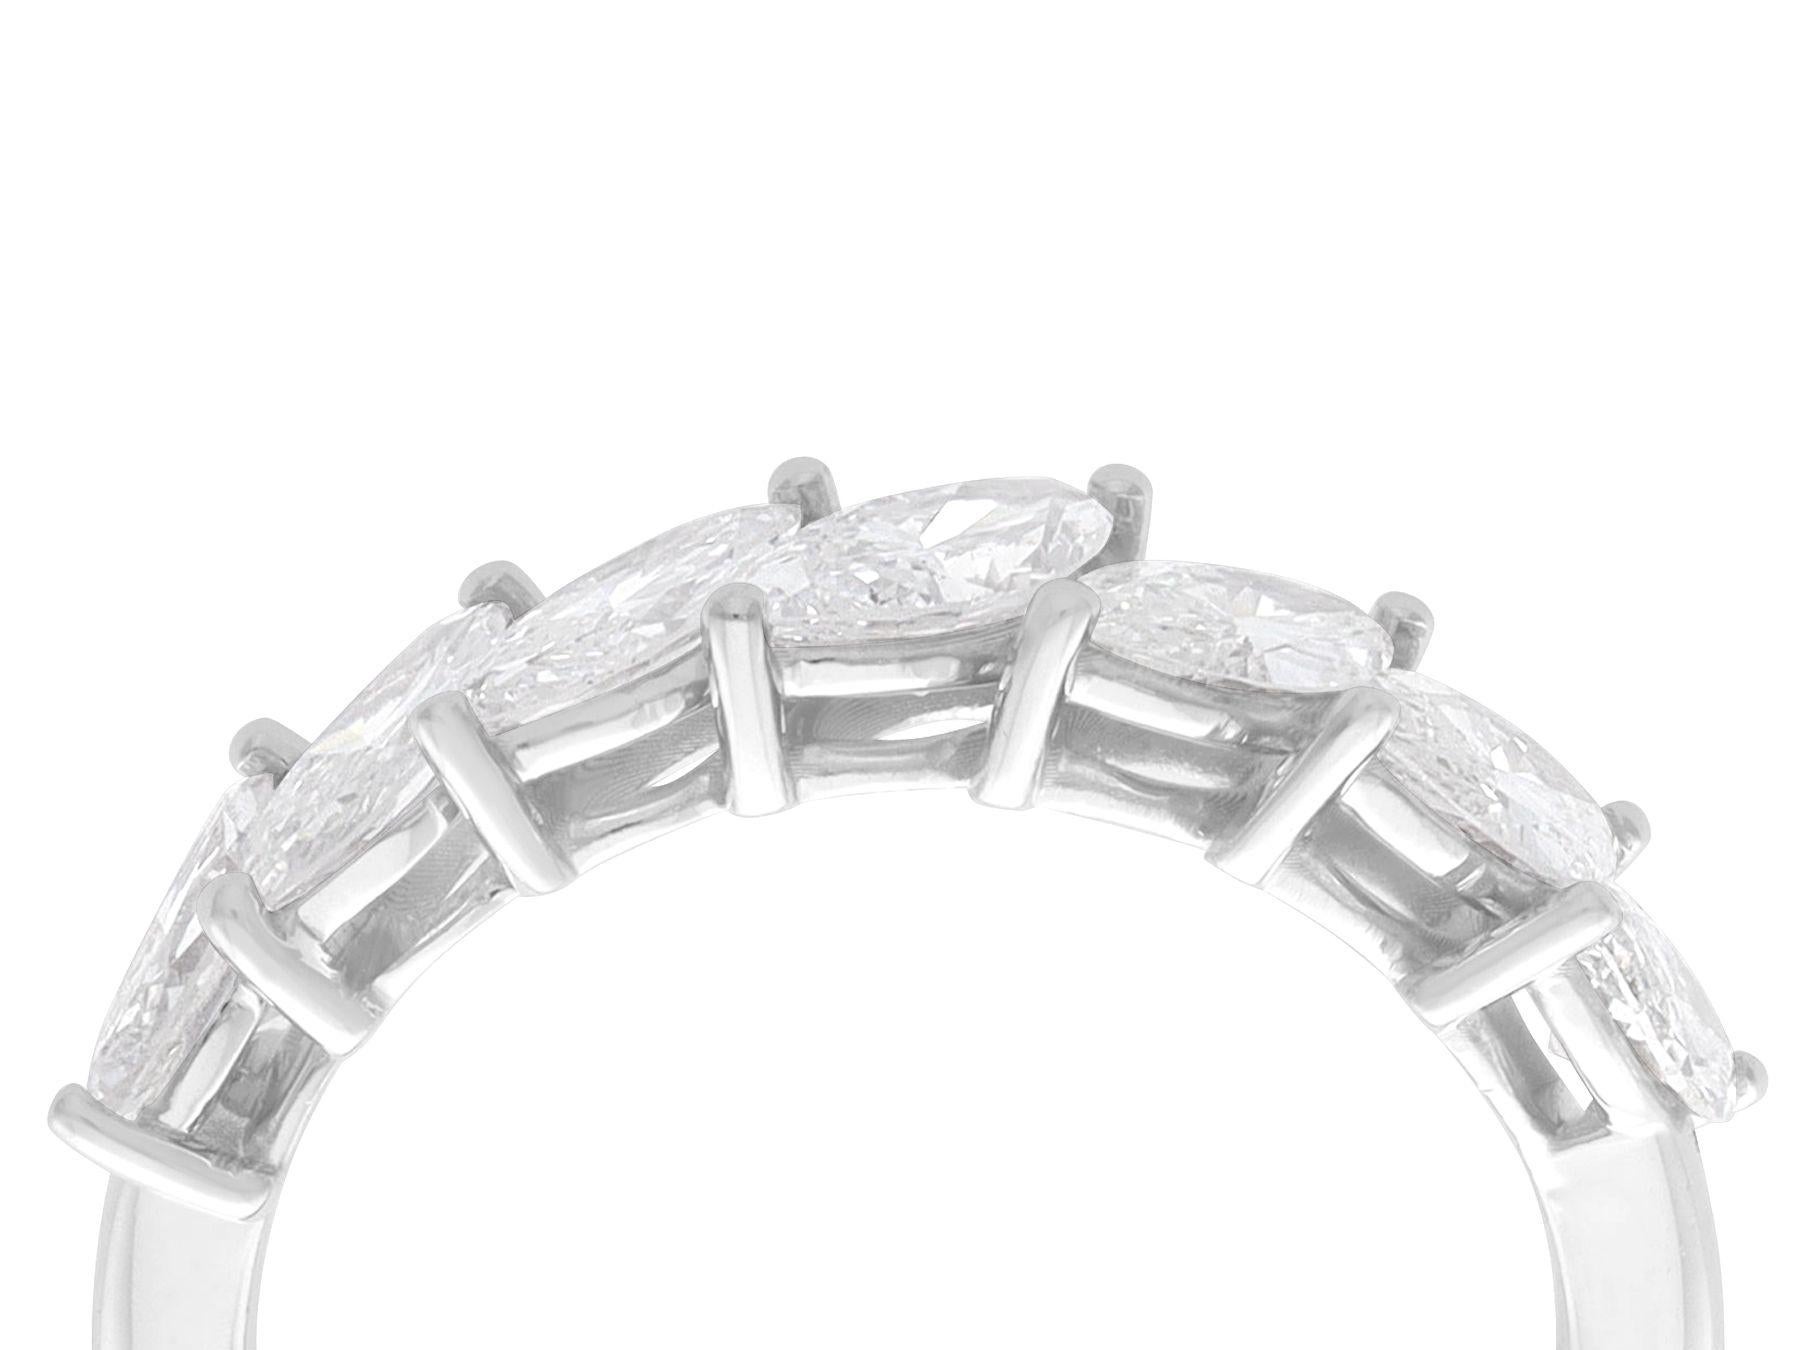 A stunning, fine and impressive vintage 1.72 carat diamond and 18 karat white gold half eternity ring; part of our diverse diamond jewelry and estate jewelry collections

This stunning, fine and impressive vintage eternity ring has been crafted in